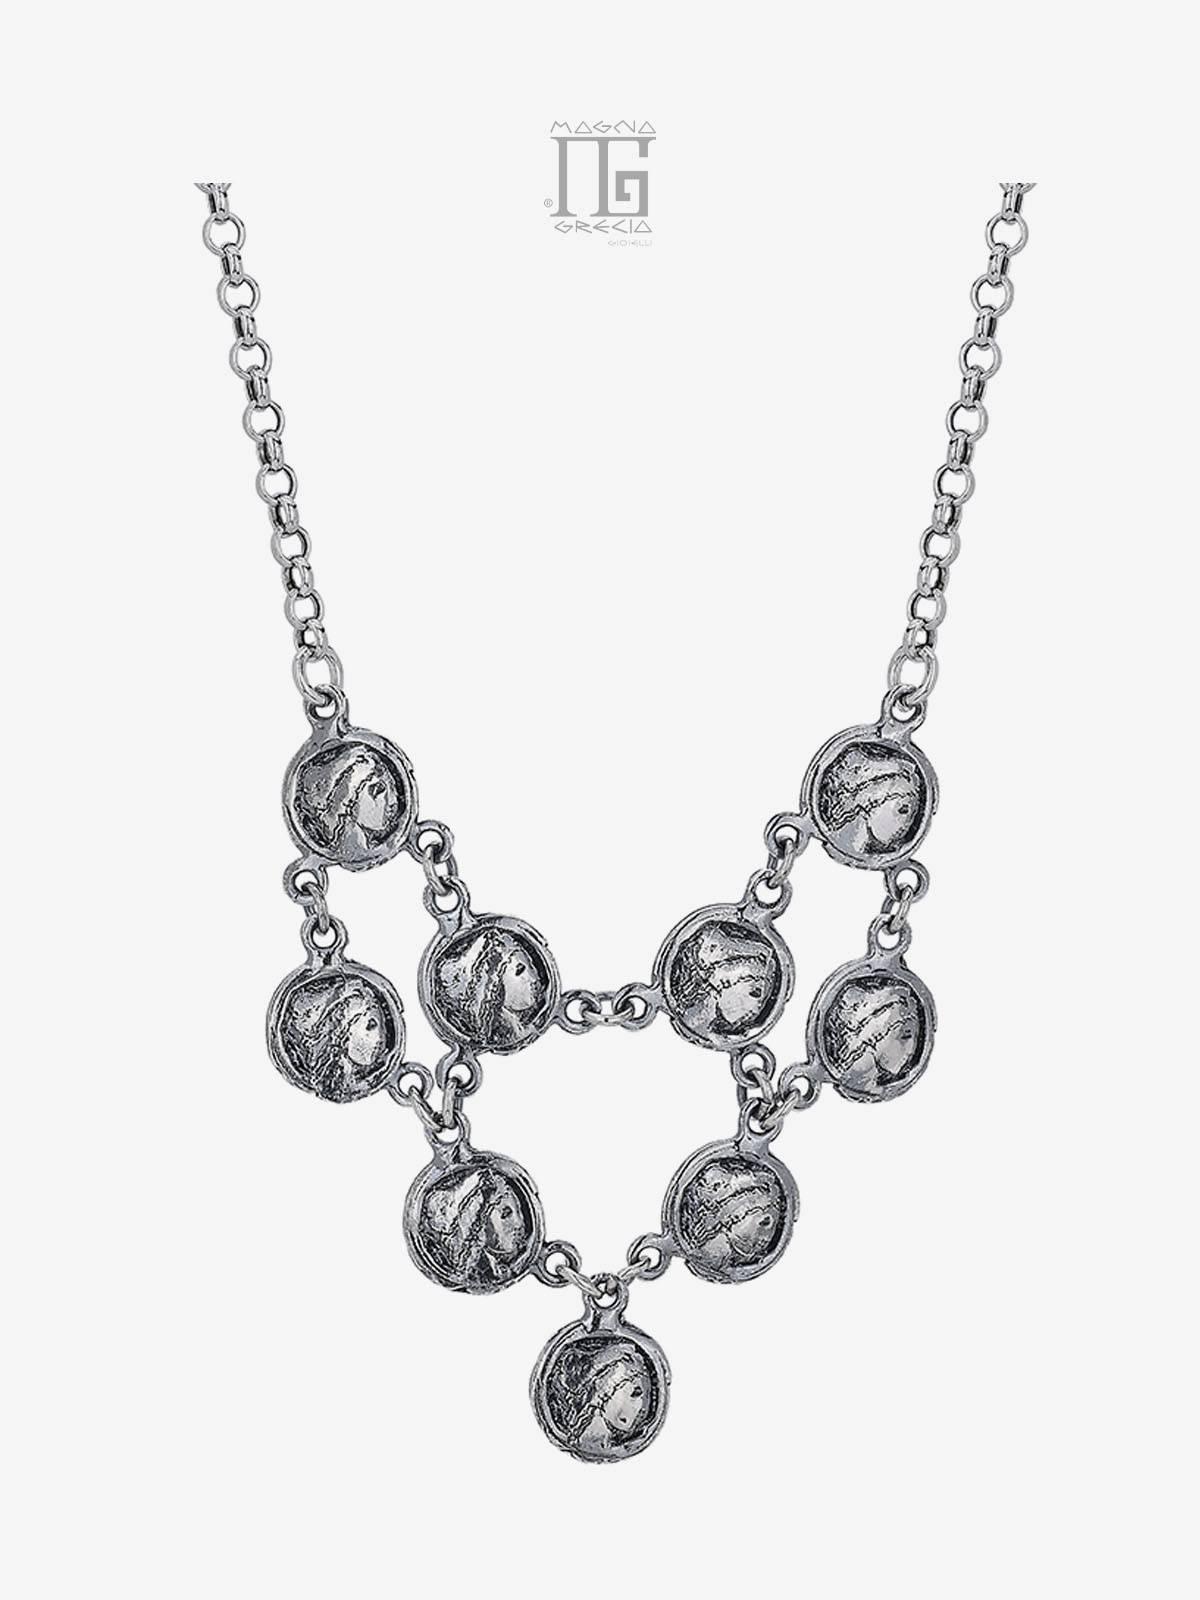 Silver necklace with coins depicting the Goddess Venus Milo Cod. MGK 4264 V